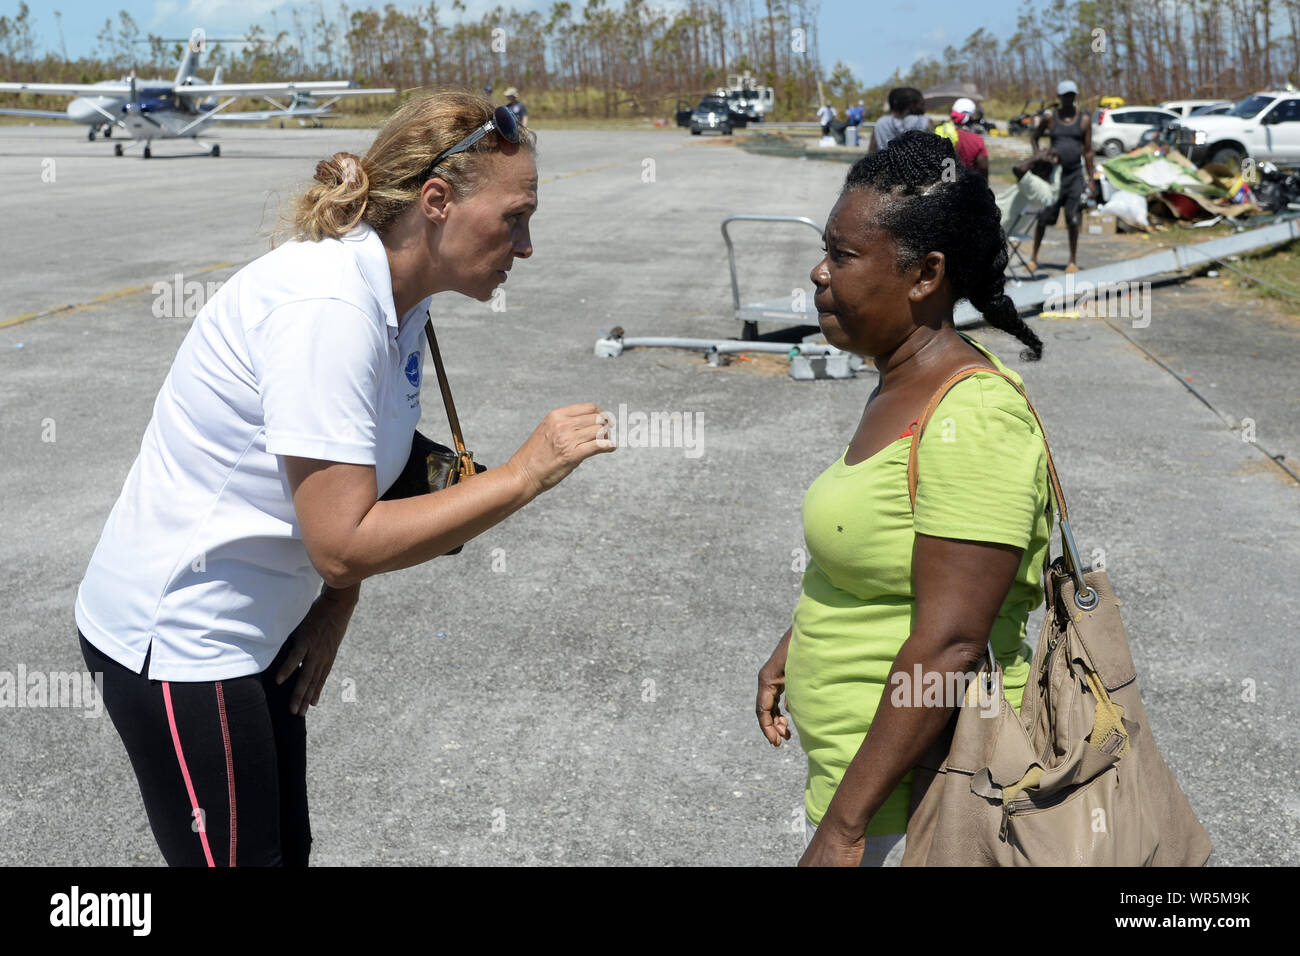 Treasure Cay, The Bahamas. 9th Sep 2019. Broward County business woman, Christina Henley comforts a Bahamian woman during her visit to Treasure Cay in the Bahamas on September 9, 2019. The stop on Treasure Cay, The Bahamas was conducted to provide consumable and medical products to the local population. The visit was coordinated by 'Shipwreck Park', a 501 (c) (3) corporation which is responsible for the acceptance and distribution of relief goods, consumables and medical supplies for the island chain. Credit: UPI/Alamy Live News Stock Photo